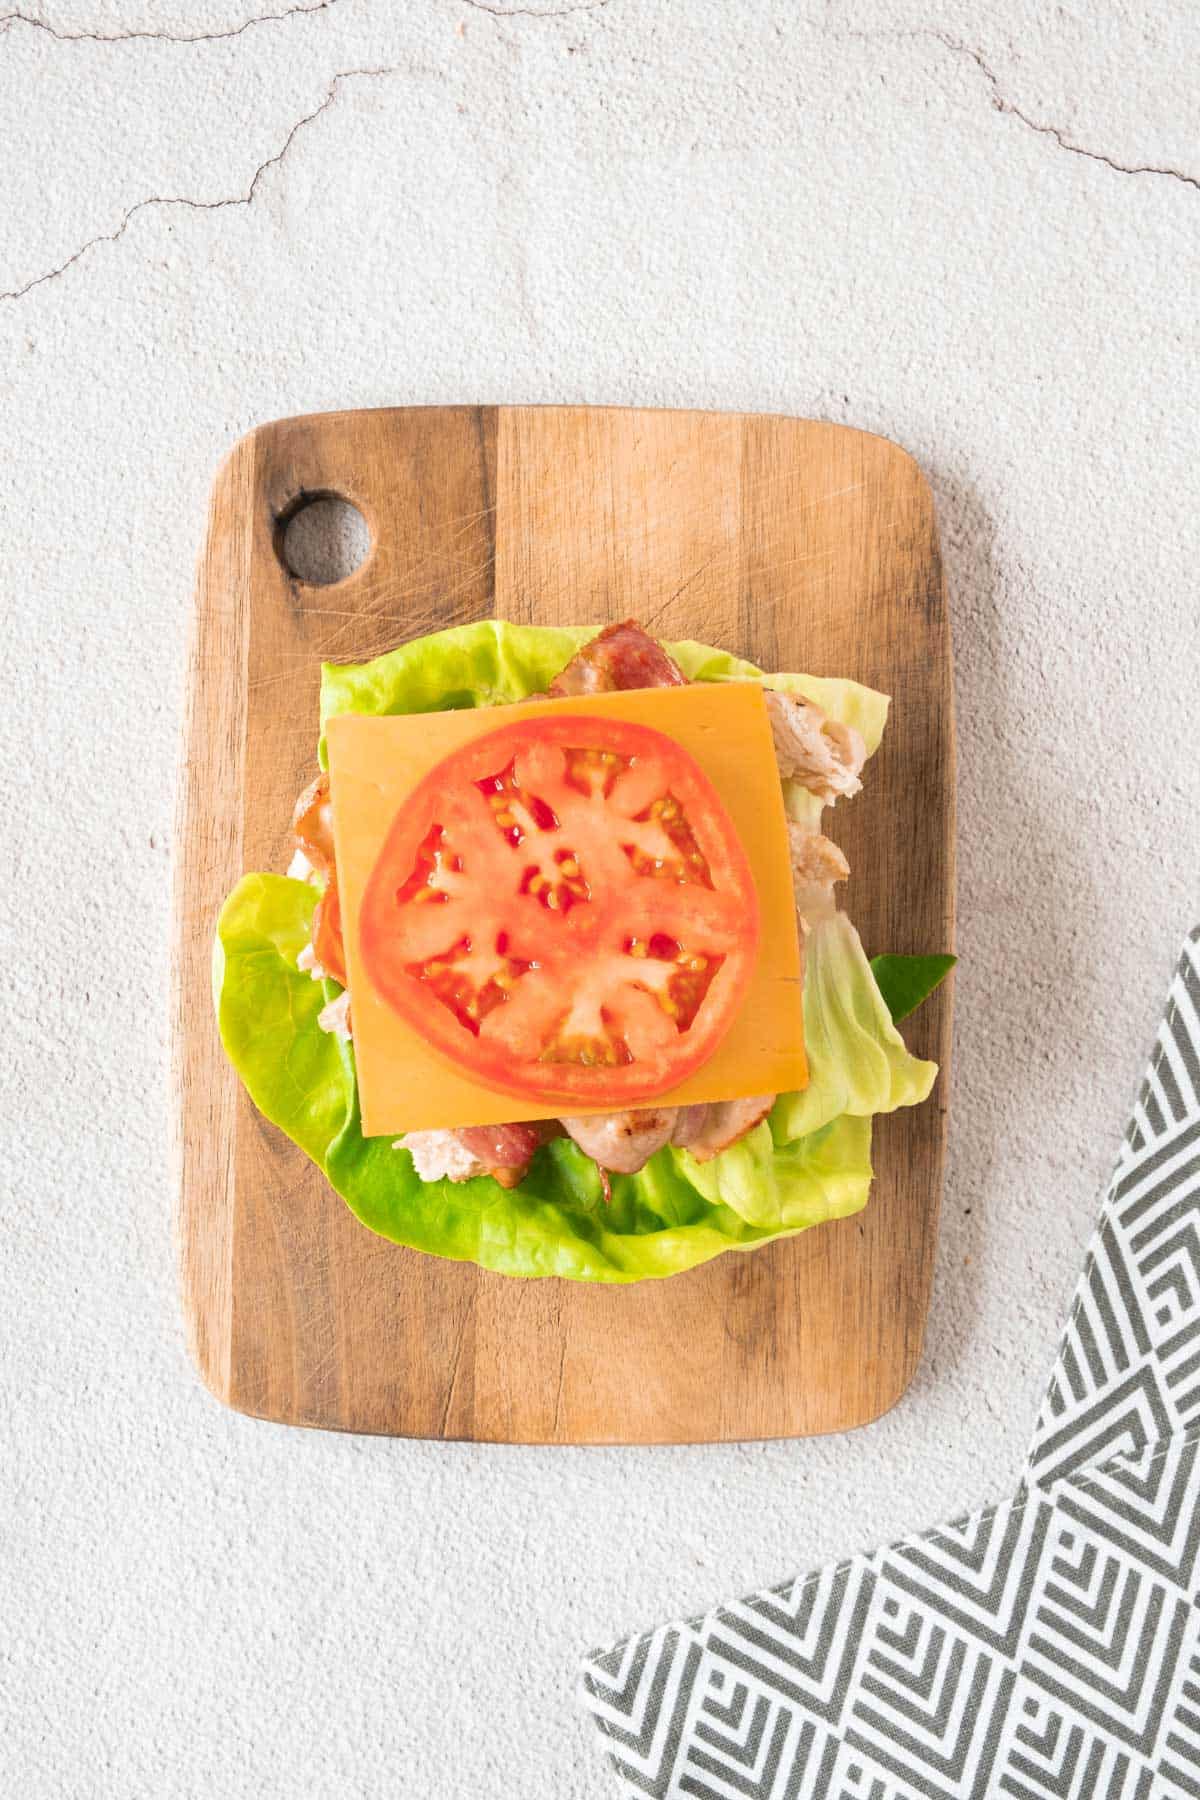 A sandwich with tomatoes and lettuce on a wooden cutting board.